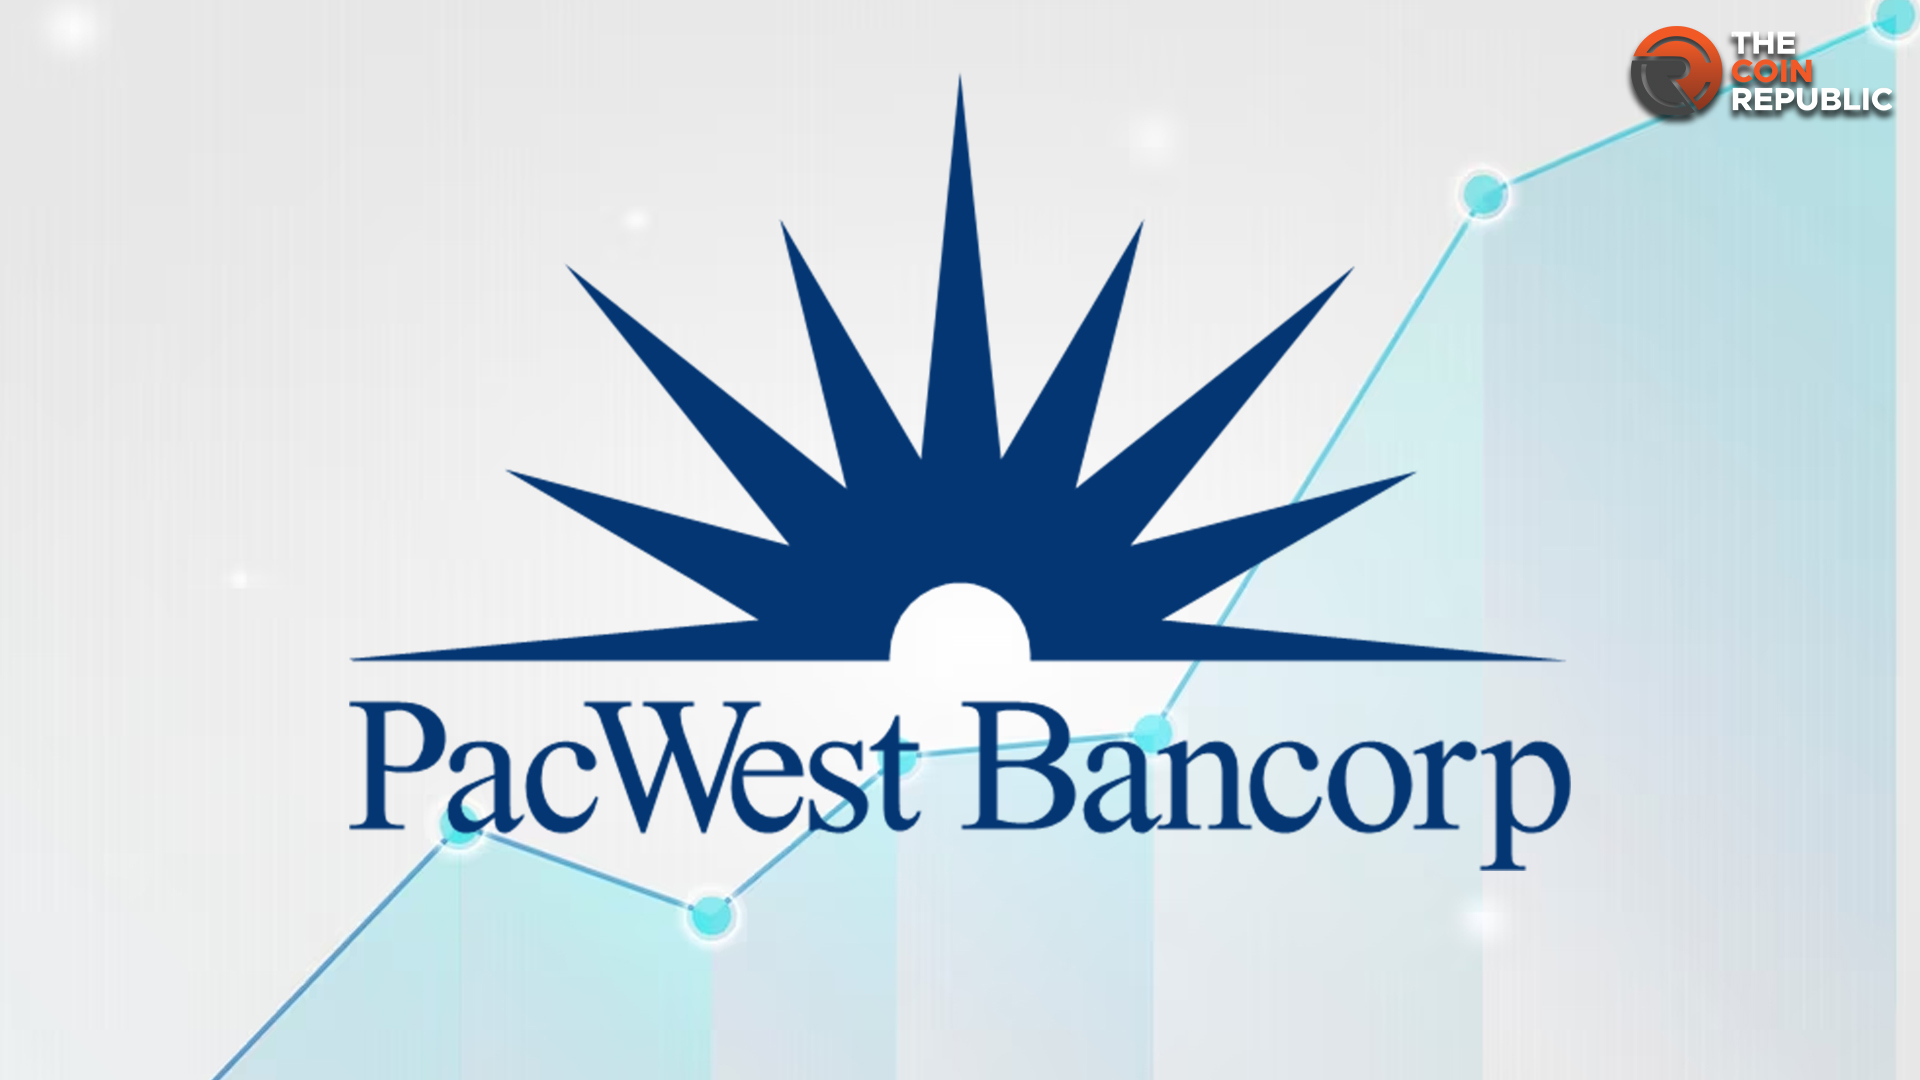 PACW Stock Dips 16%: Is More Downside Ahead for PacWest?